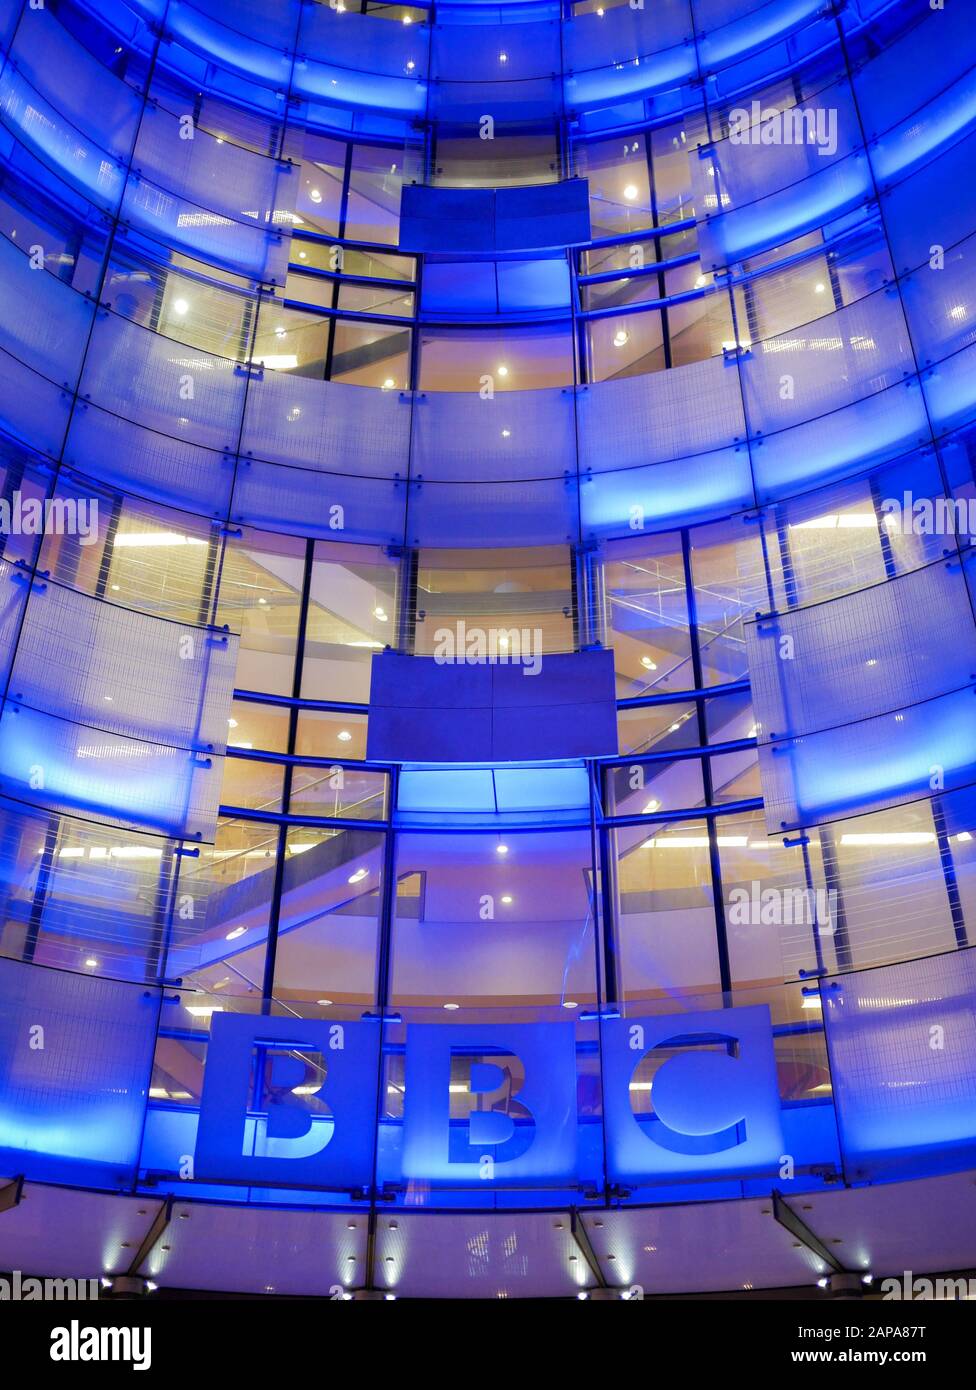 BBC Broadcasting House. A low-angle view of the façade to the headquarters of the BBC in central London. Stock Photo